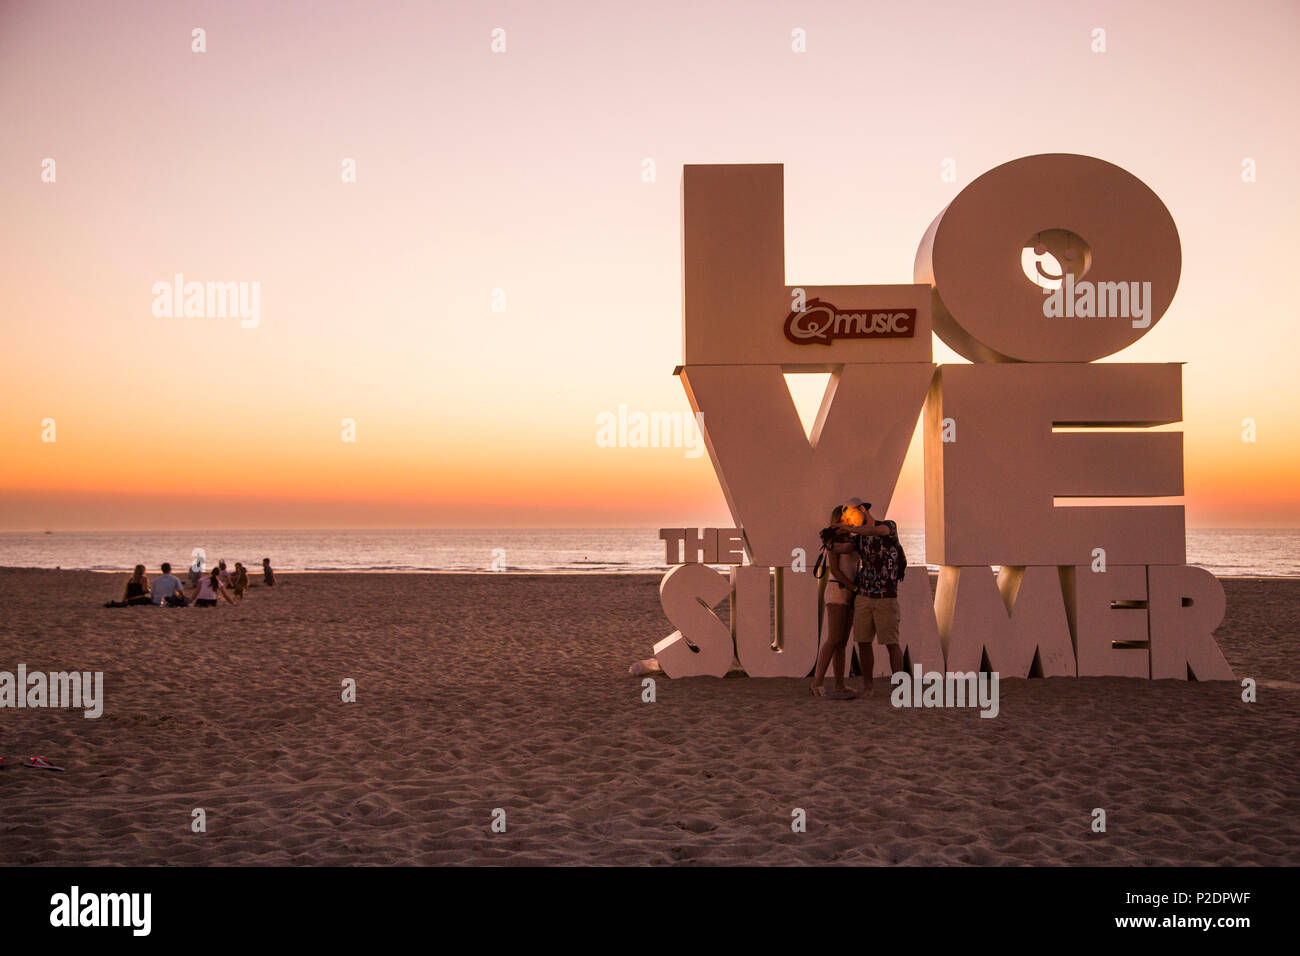 Couple taking a selfie photograph with smartphone in front of Love sculpture on the beach at sunset, Ostend, Flanders, Flemish R Stock Photo